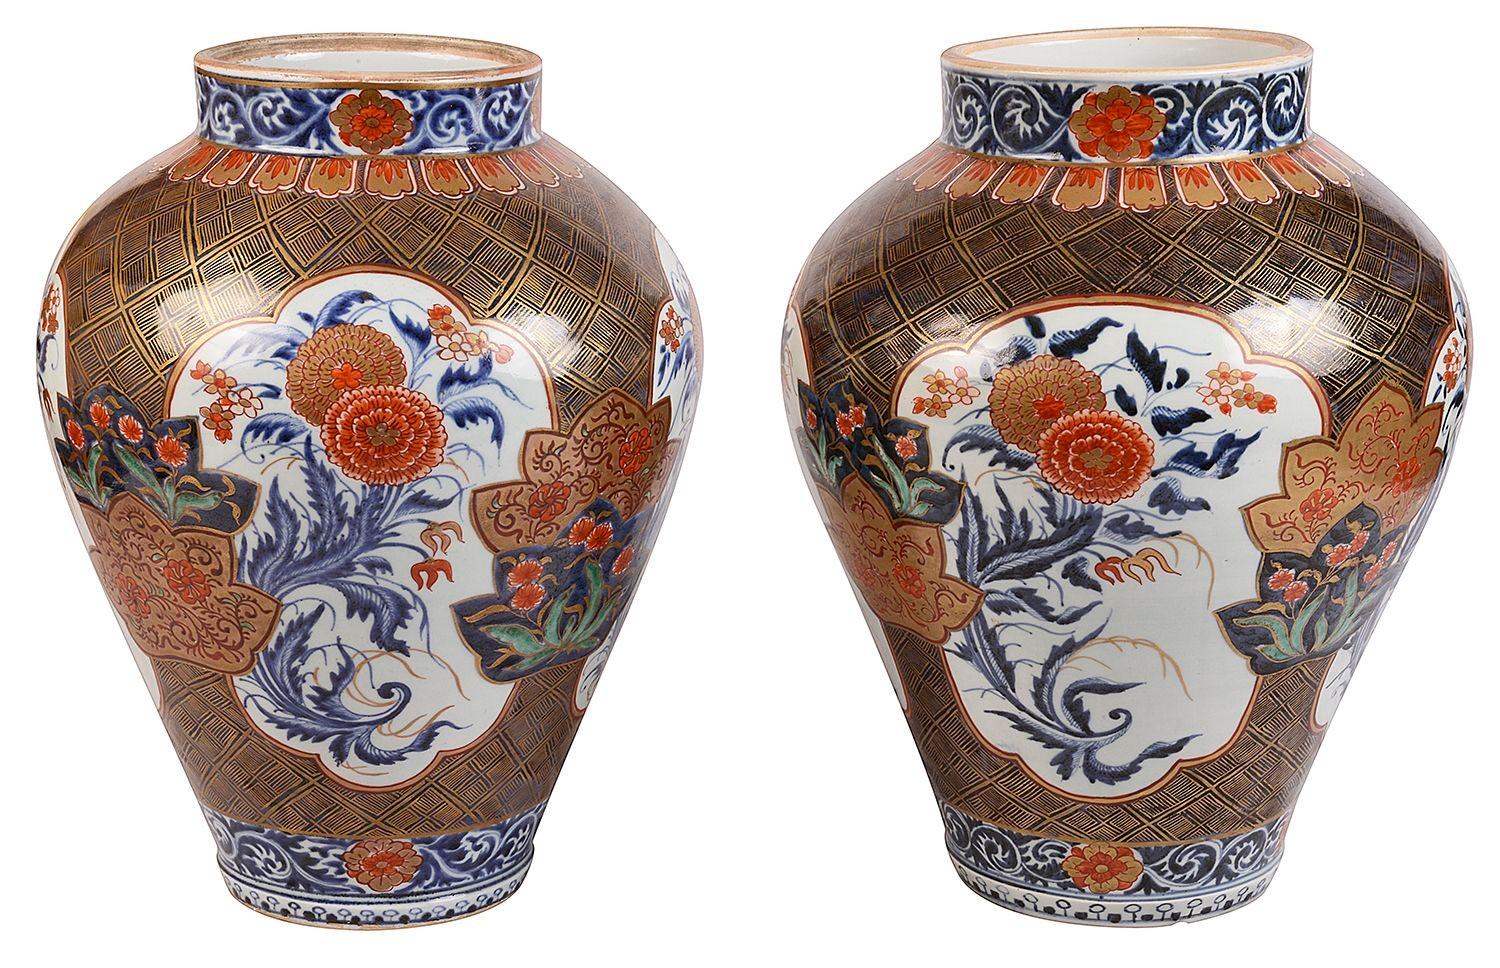 A wonderful quality pair of late 18th Century Japanese Arita porcelain Imari vases, each with wonderful bold colouring, depicting inset panels of exotic flowers within a ground of classical motifs, circa 1780.



Batch 72. 61778. DAKZ